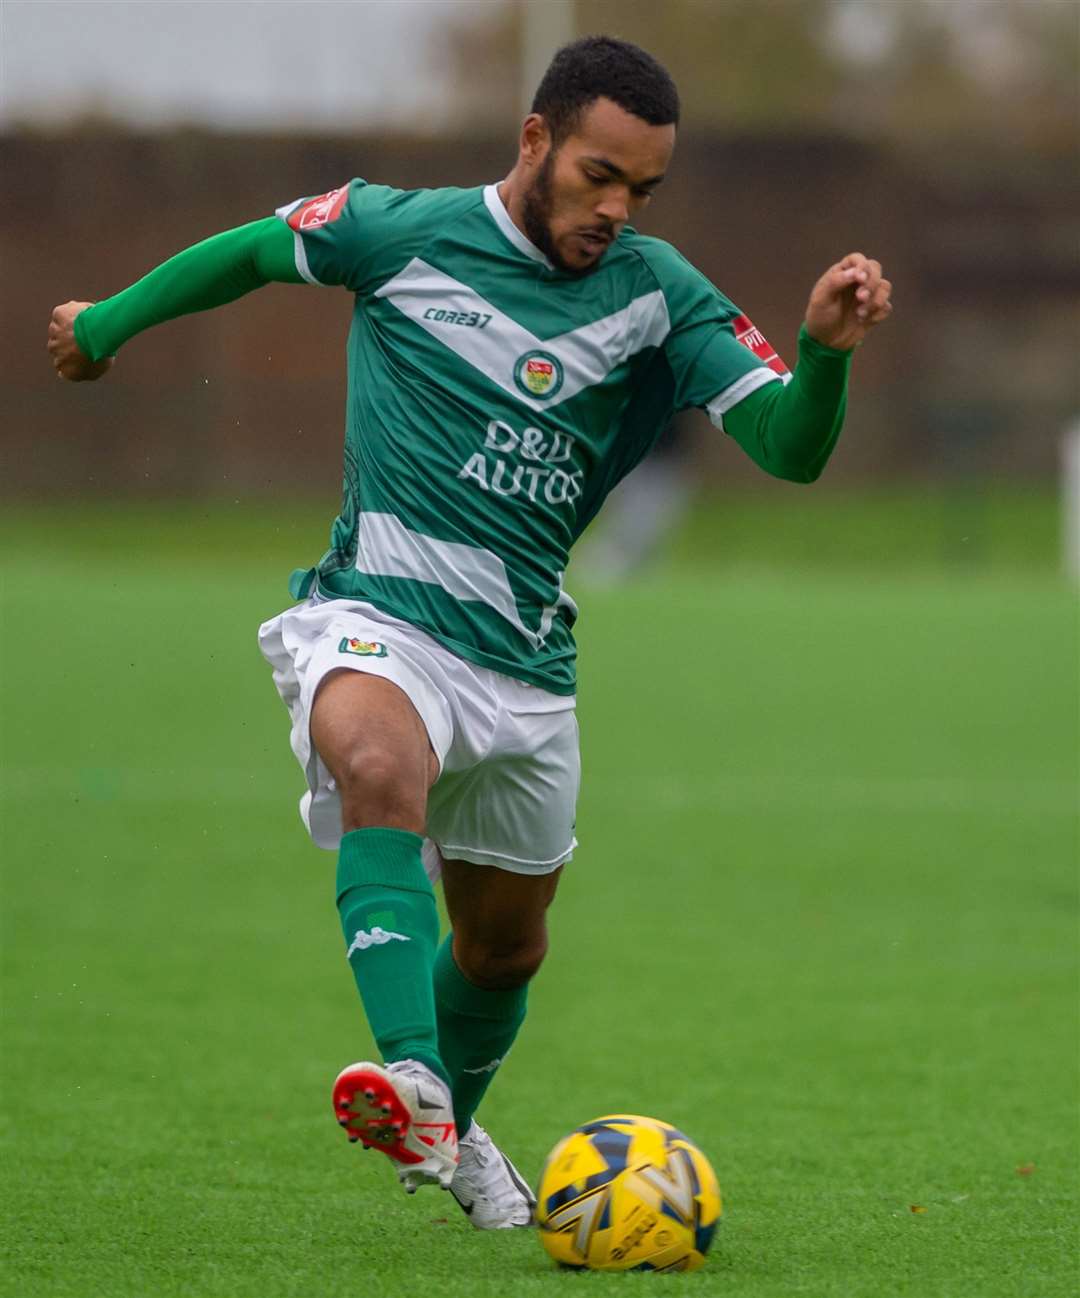 Former Ashford defender Tariq Ossai made his Town debut in Medway. Picture: Ian Scammell